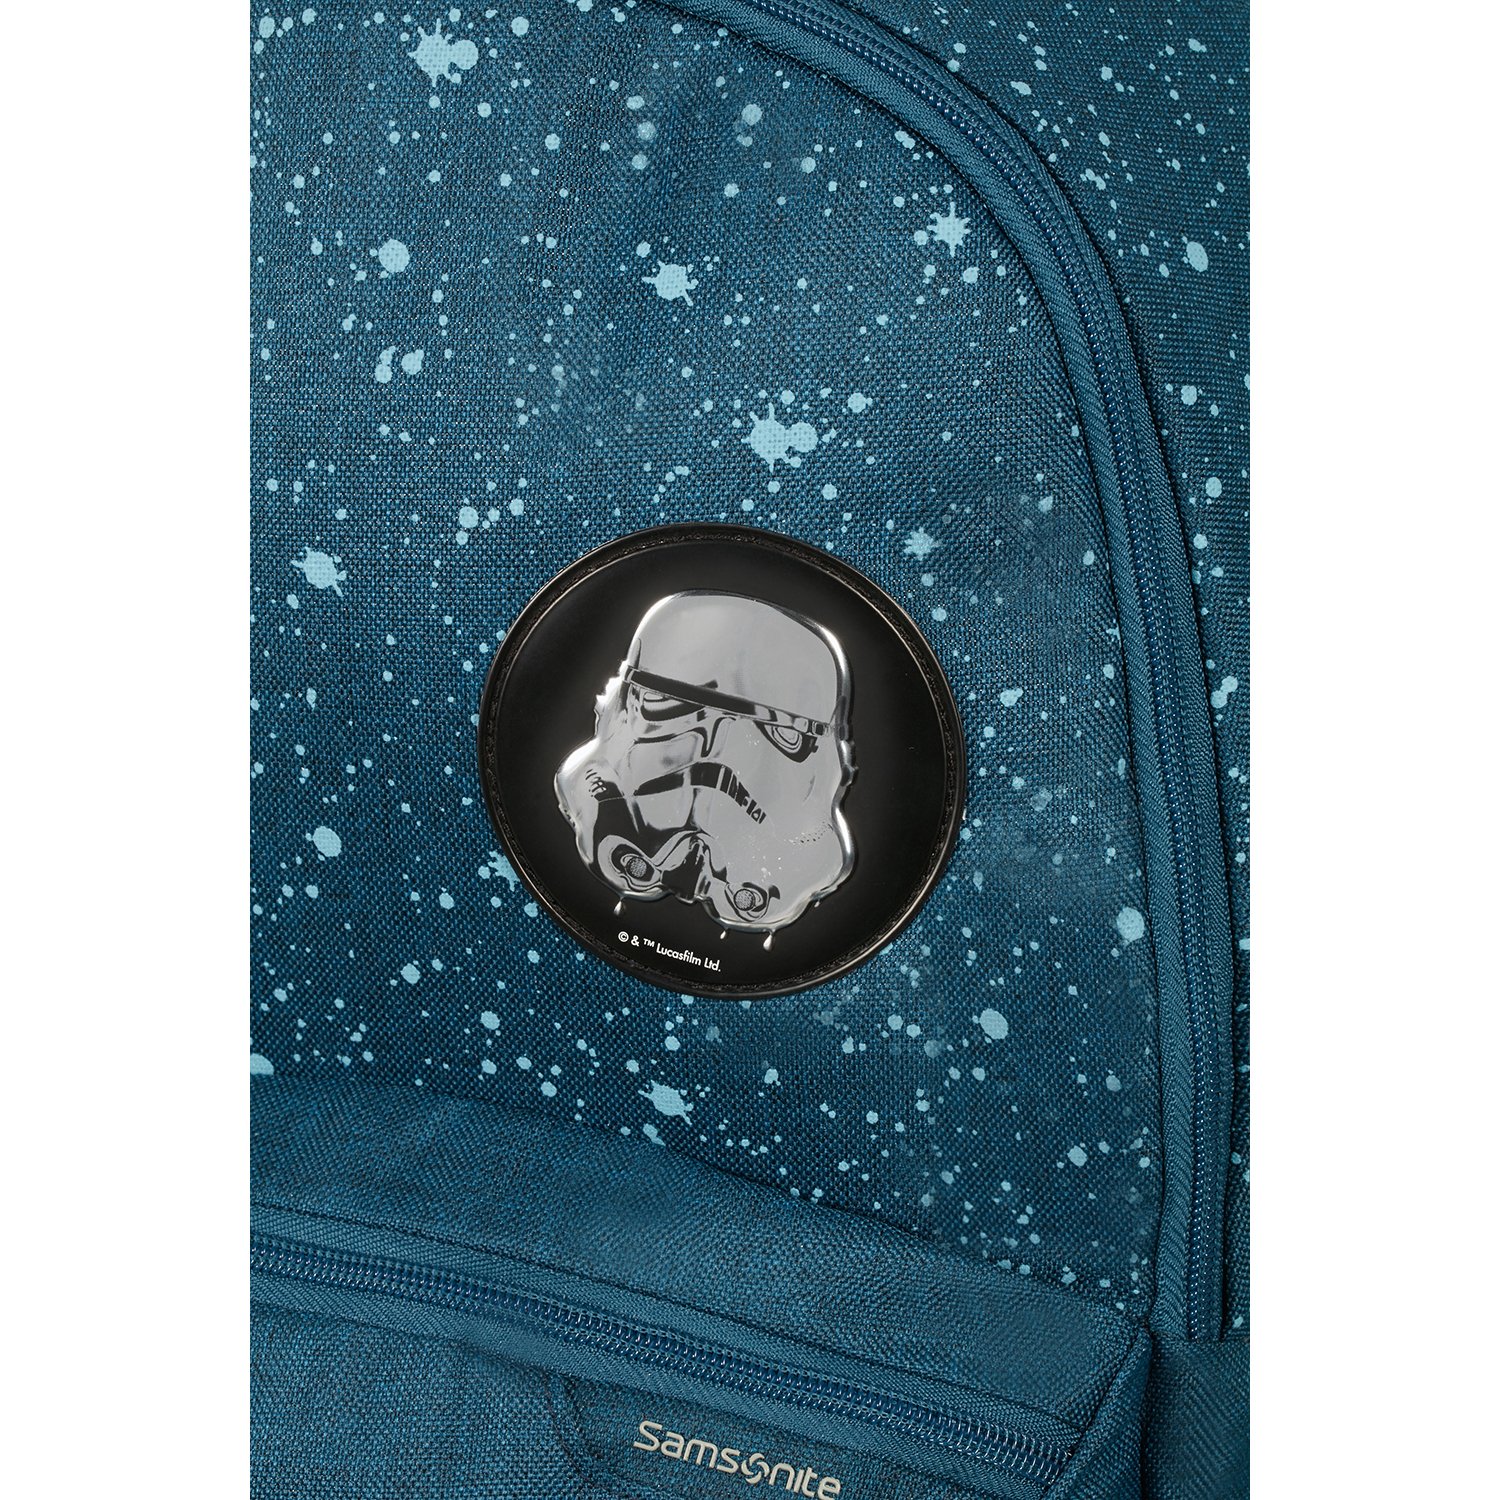 COLOR FUNTIME DISNEY-BACKPACK/WH STAR WA S51C-001-SF000*11